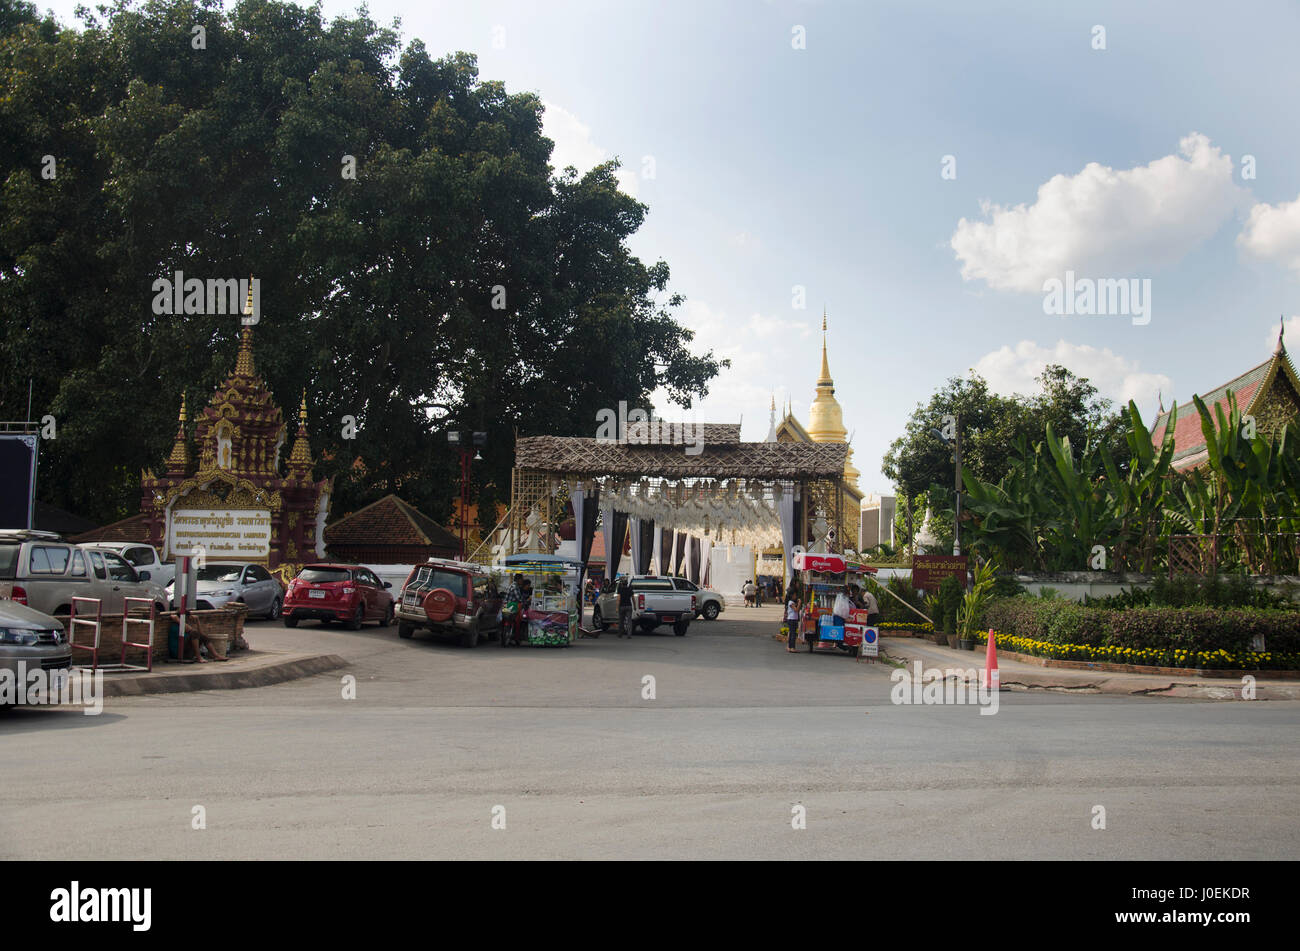 Landscape and car parking at front Wat Phra That Hariphunchai temple for people respect praying and visit chedi on December 28, 2016 in Lamphun, Thail Stock Photo